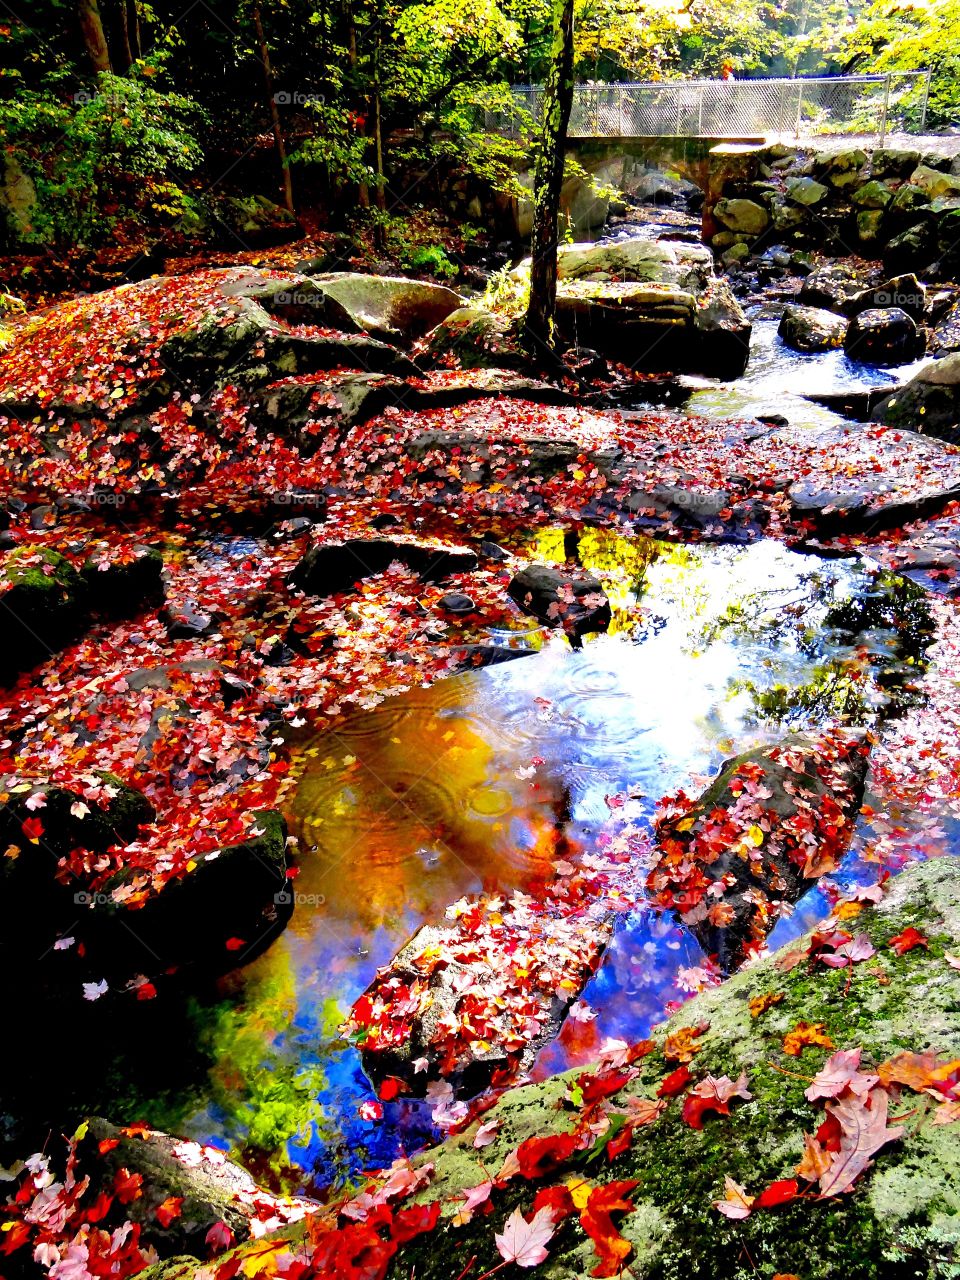 Autumn leaves fallen on creek in the forest